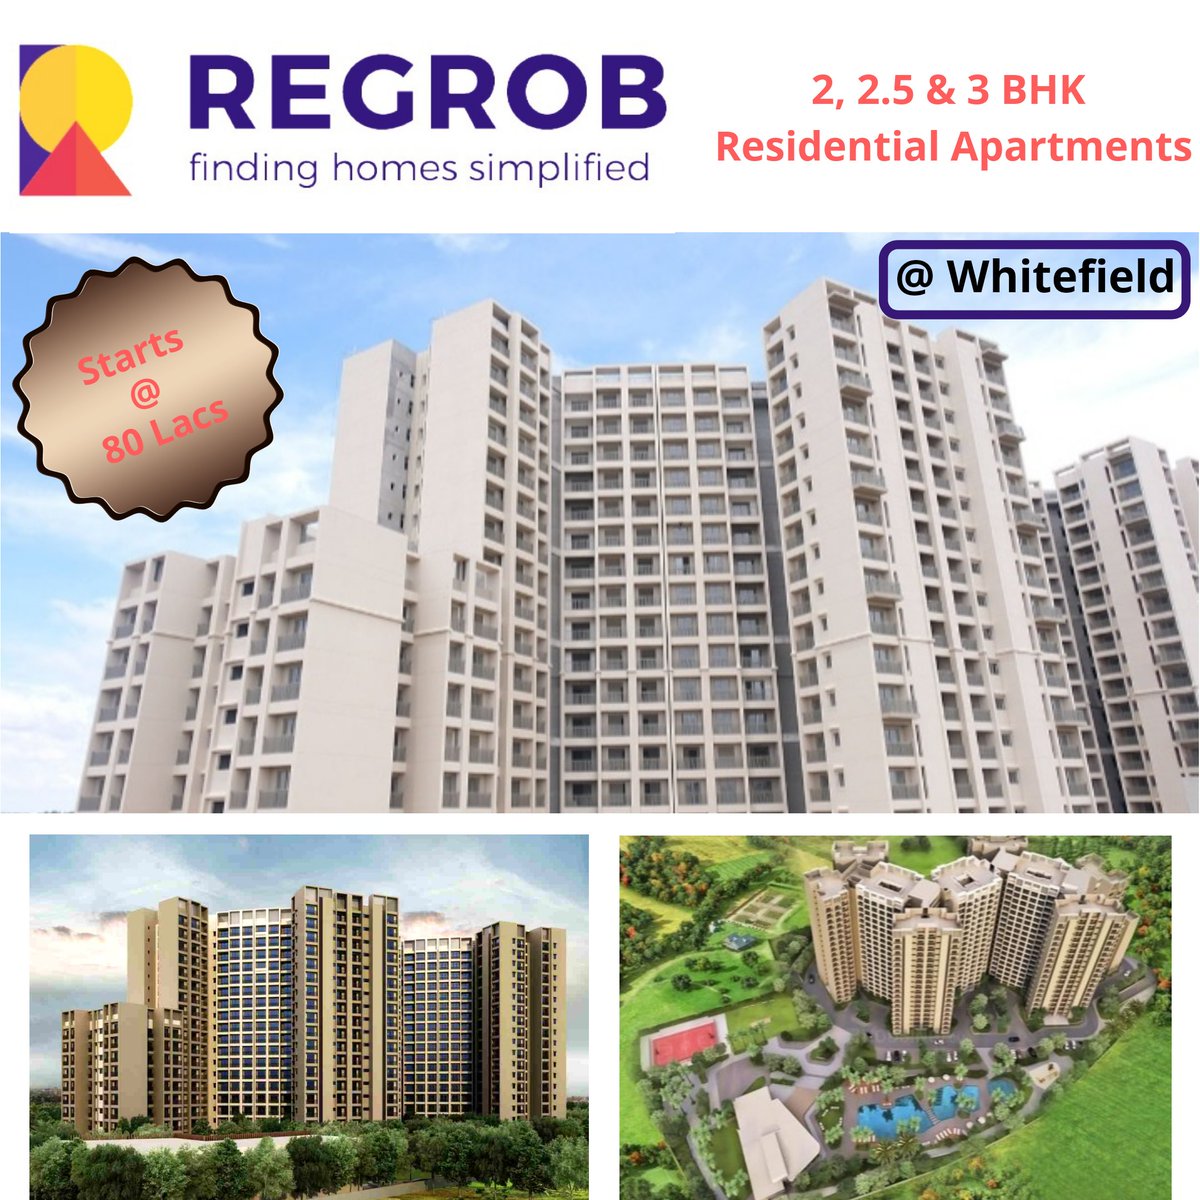 ☎️ 6366370375 | #Flatsforsale in #OrchidWhitefield Residential Project at #Whitefield #Bangalore. The price of the flats starts from 59.7 Lac Onwards!
bit.ly/2QhpFoo
#realestateinvesting #whitefieldrealestate #apartmentsforsaleinbangalore
#2bhkflatsforsaleinwhitefield